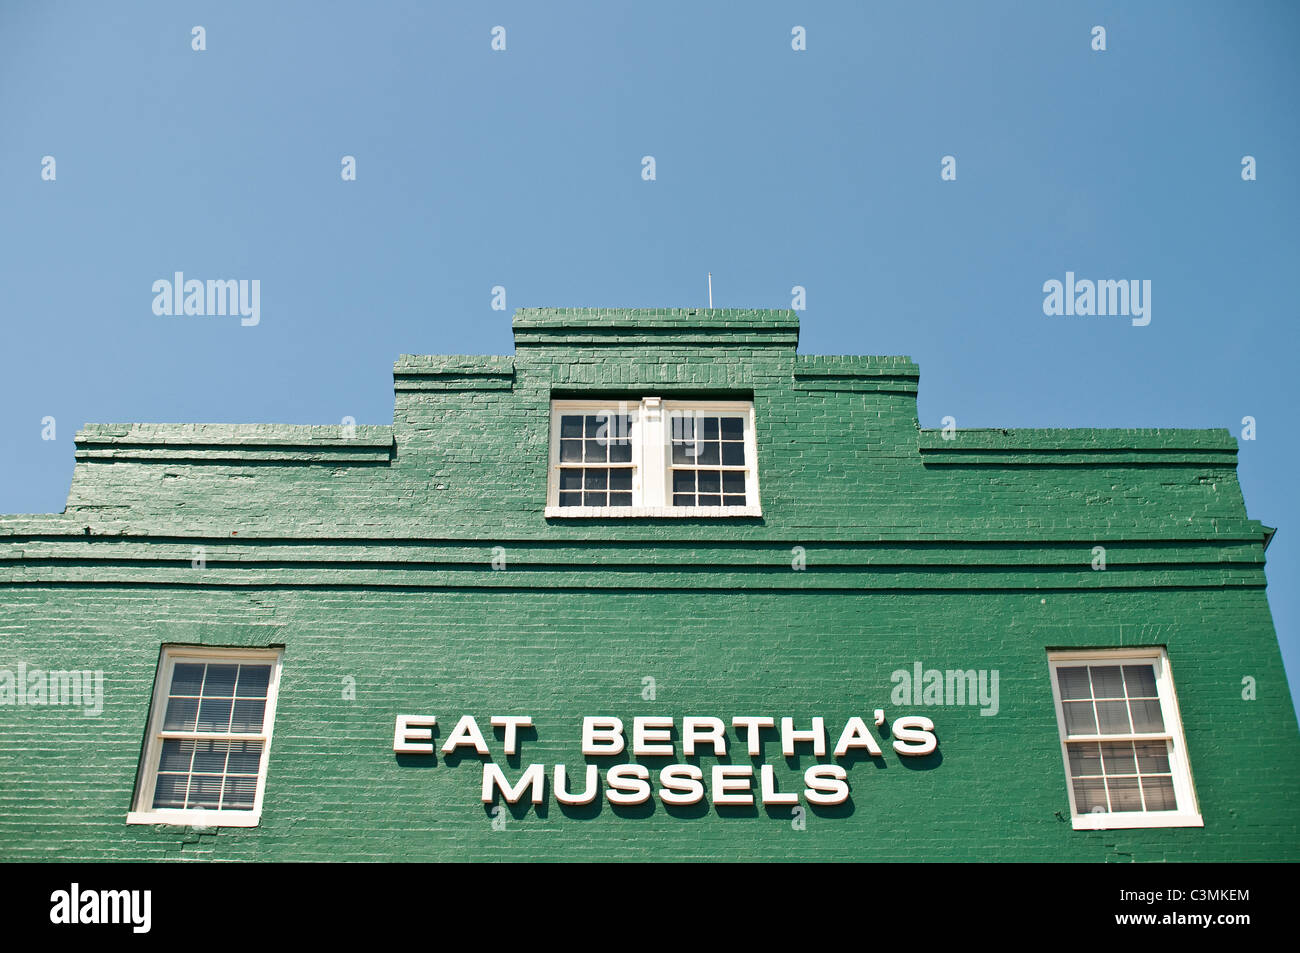 A landmark sign in Baltimore, Maryland, telling people to Eat Bertha's Mussels at Bertha's Restaurant and Bar in Fells Point. Stock Photo